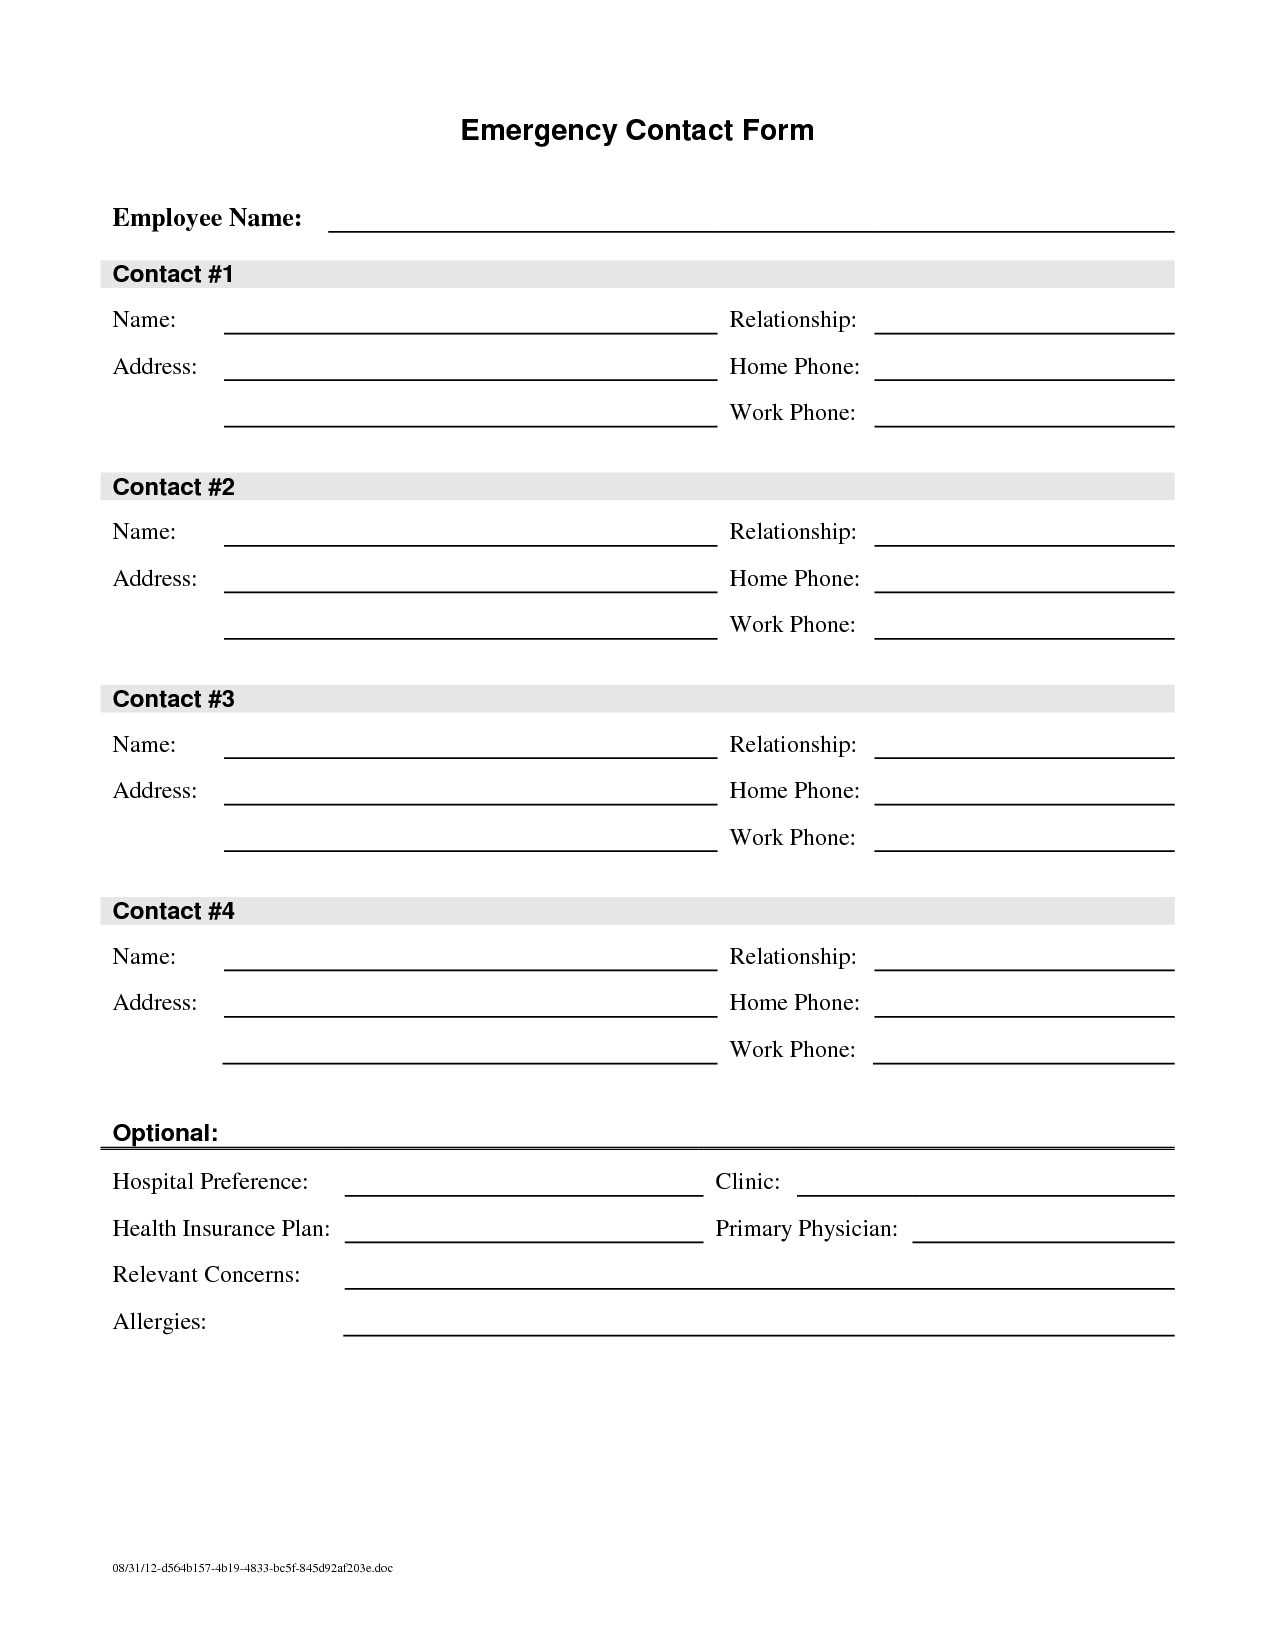 Printable Emergency Employee Contact Form Template